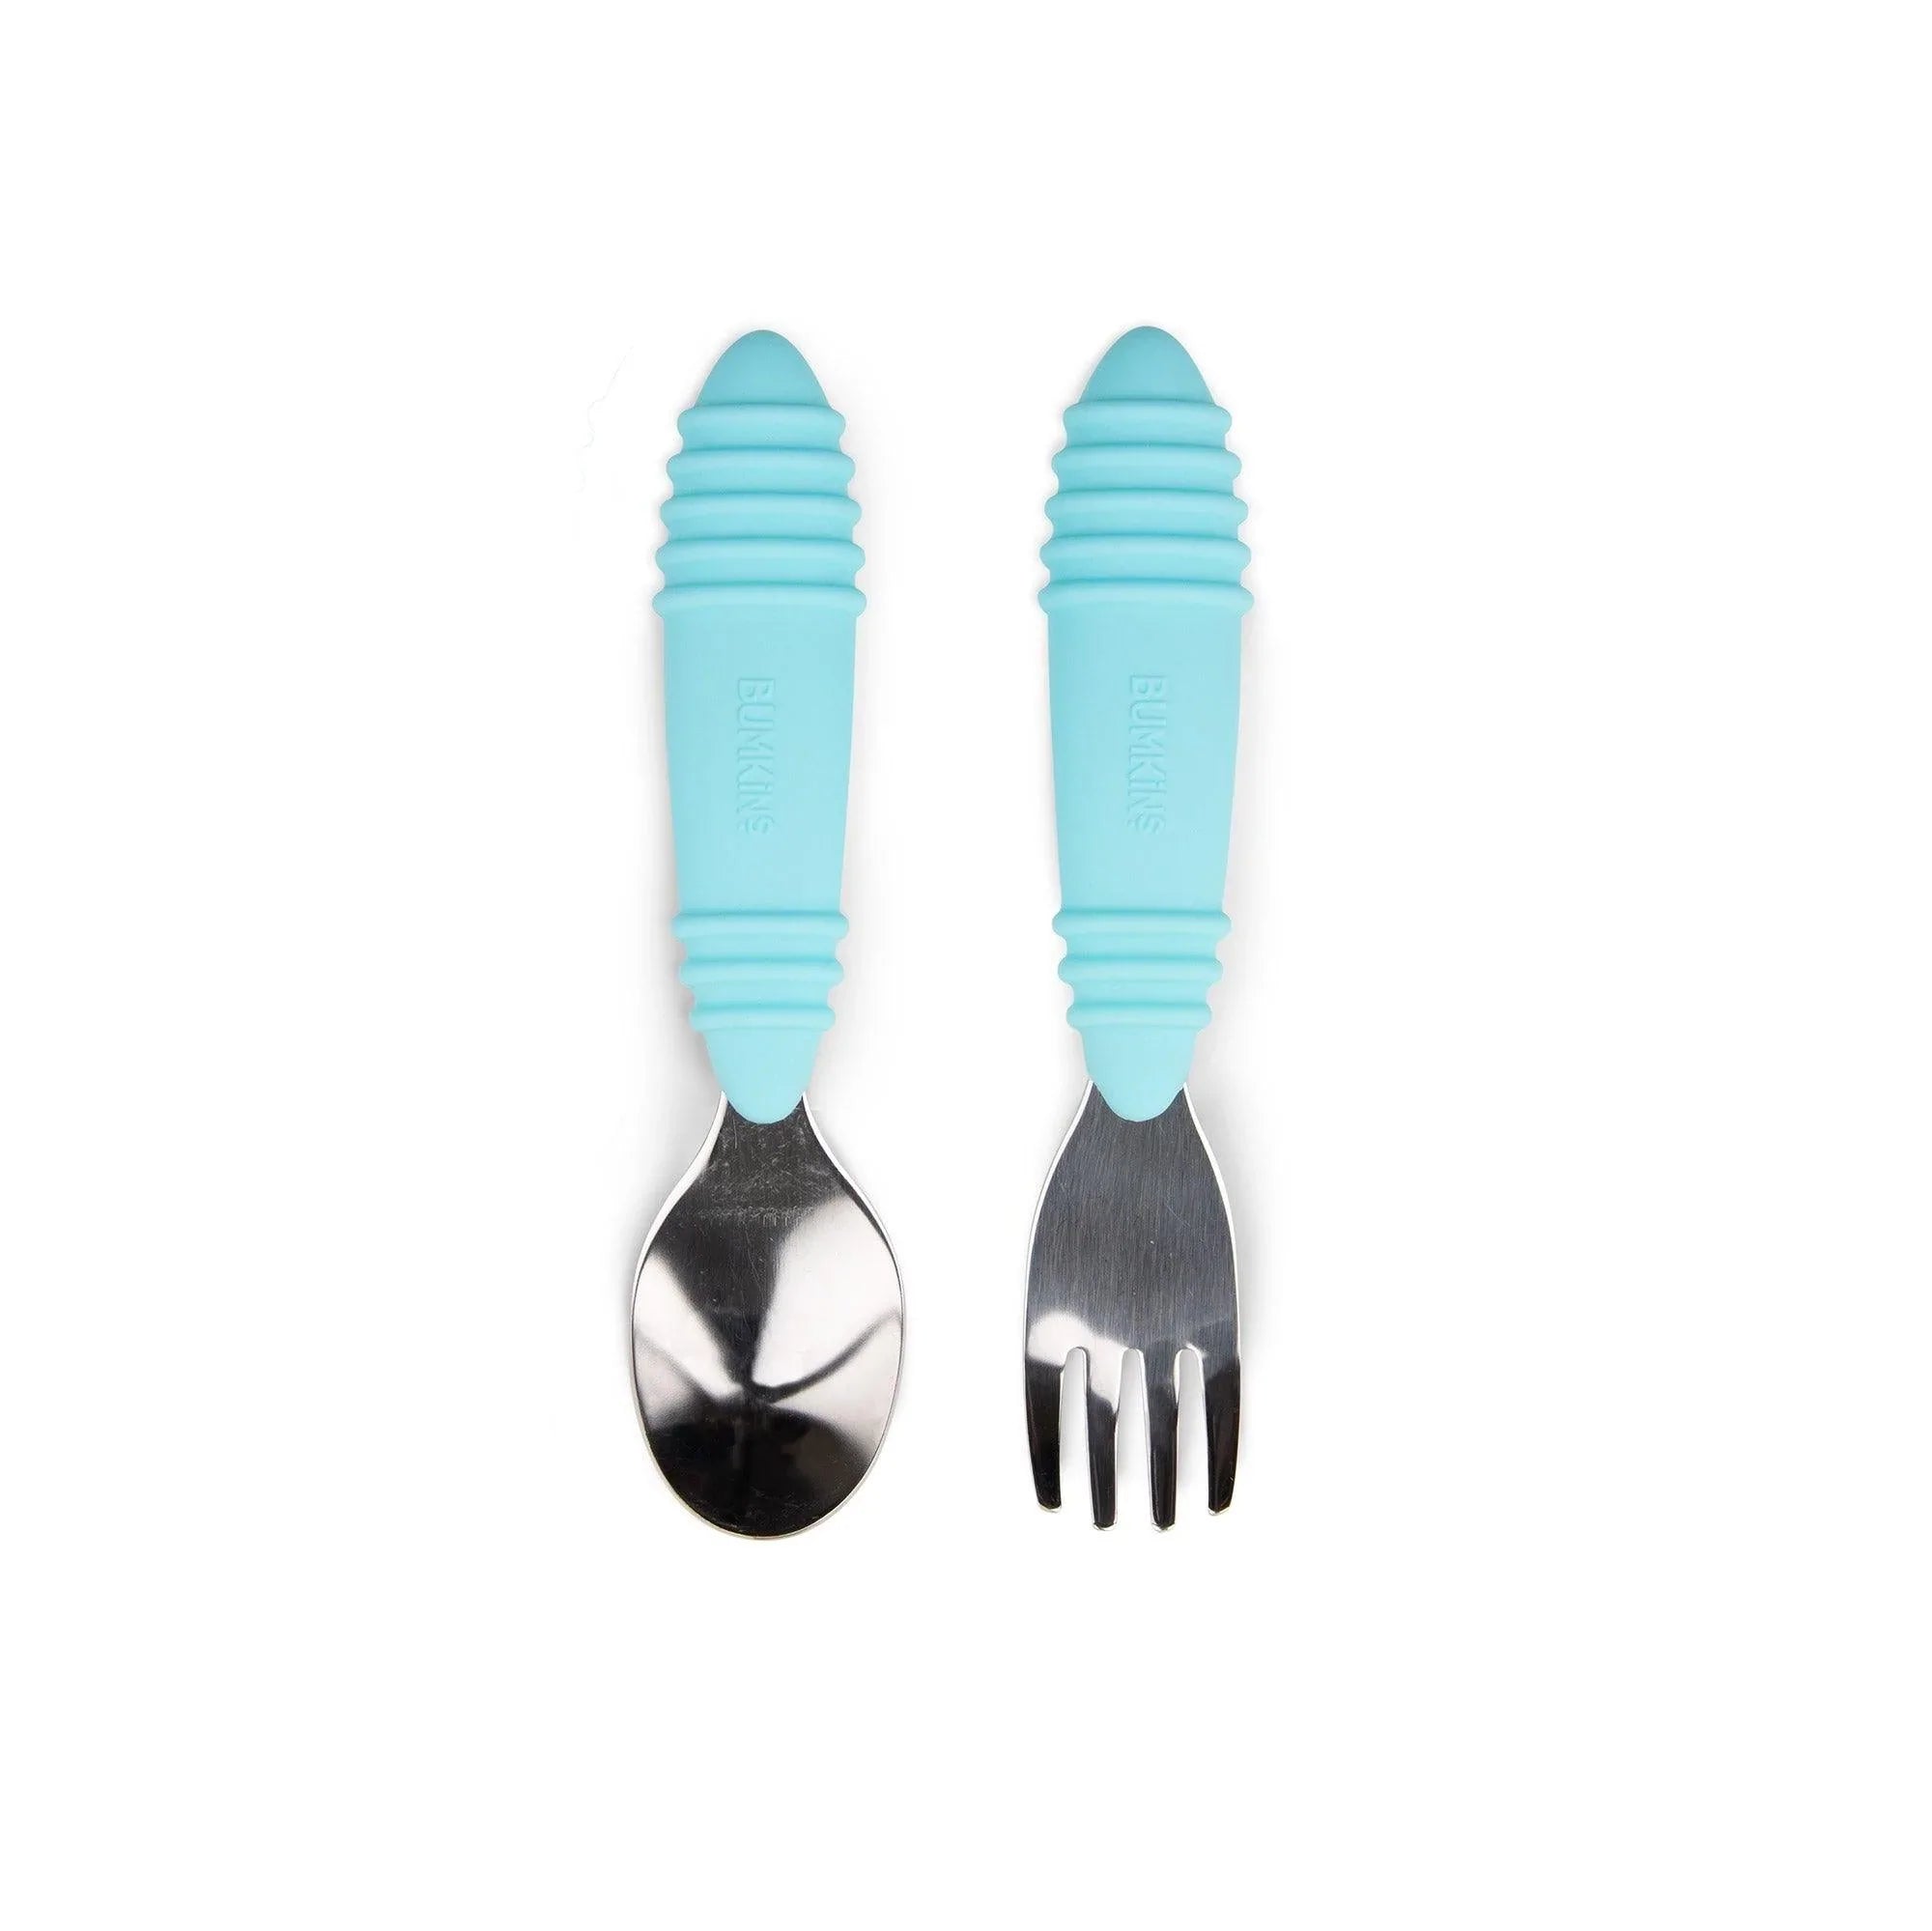 Toddler Forks And Toddler Spoon Silverware Set